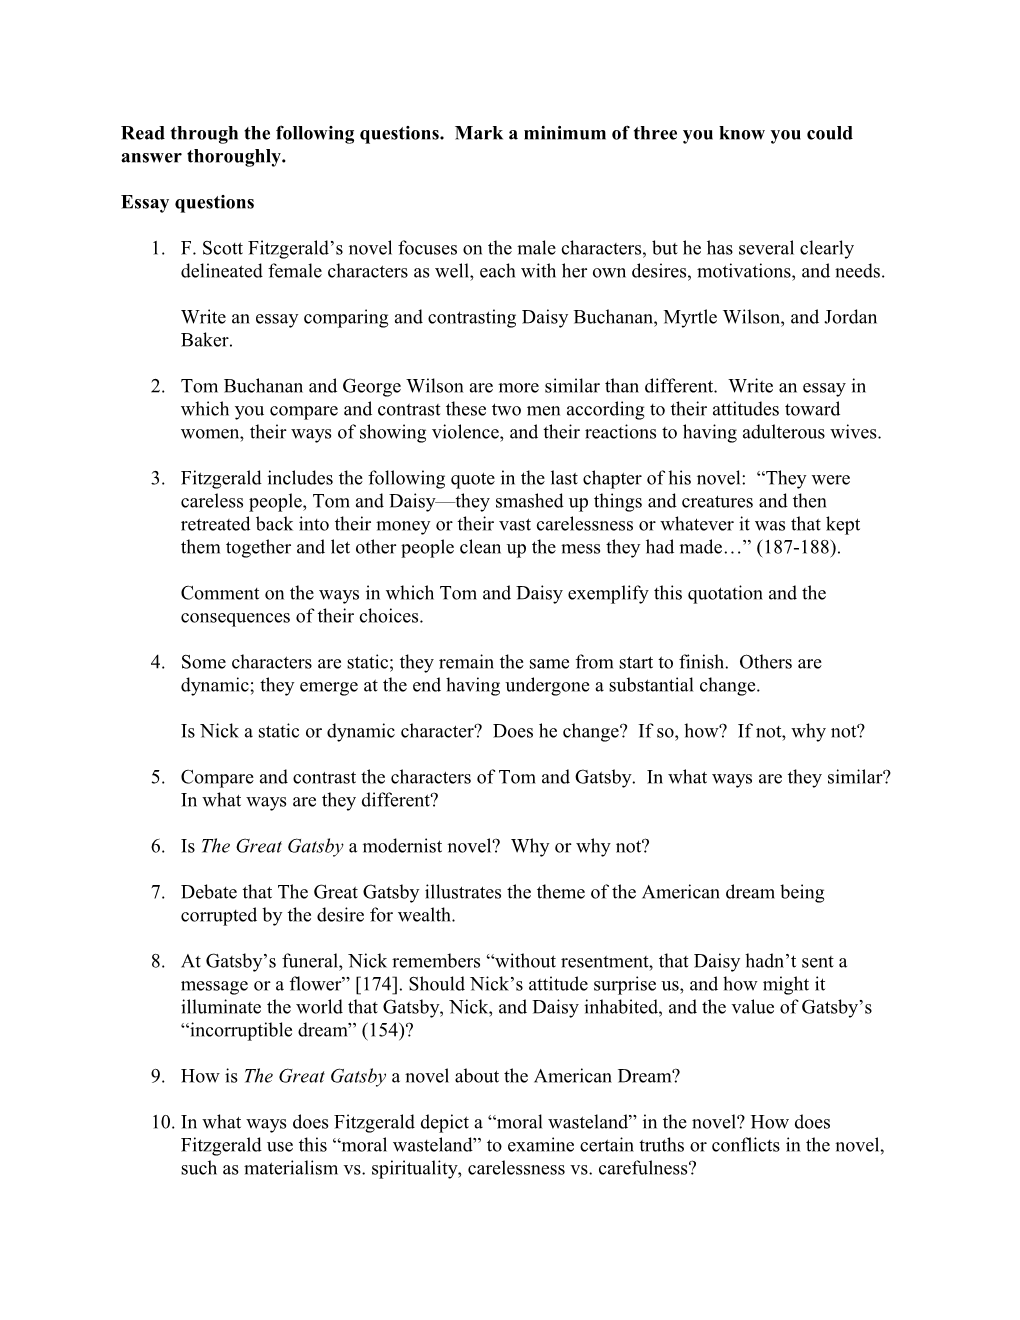 Read Through the Following Questions. Mark a Minimum of Three You Know You Could Answer